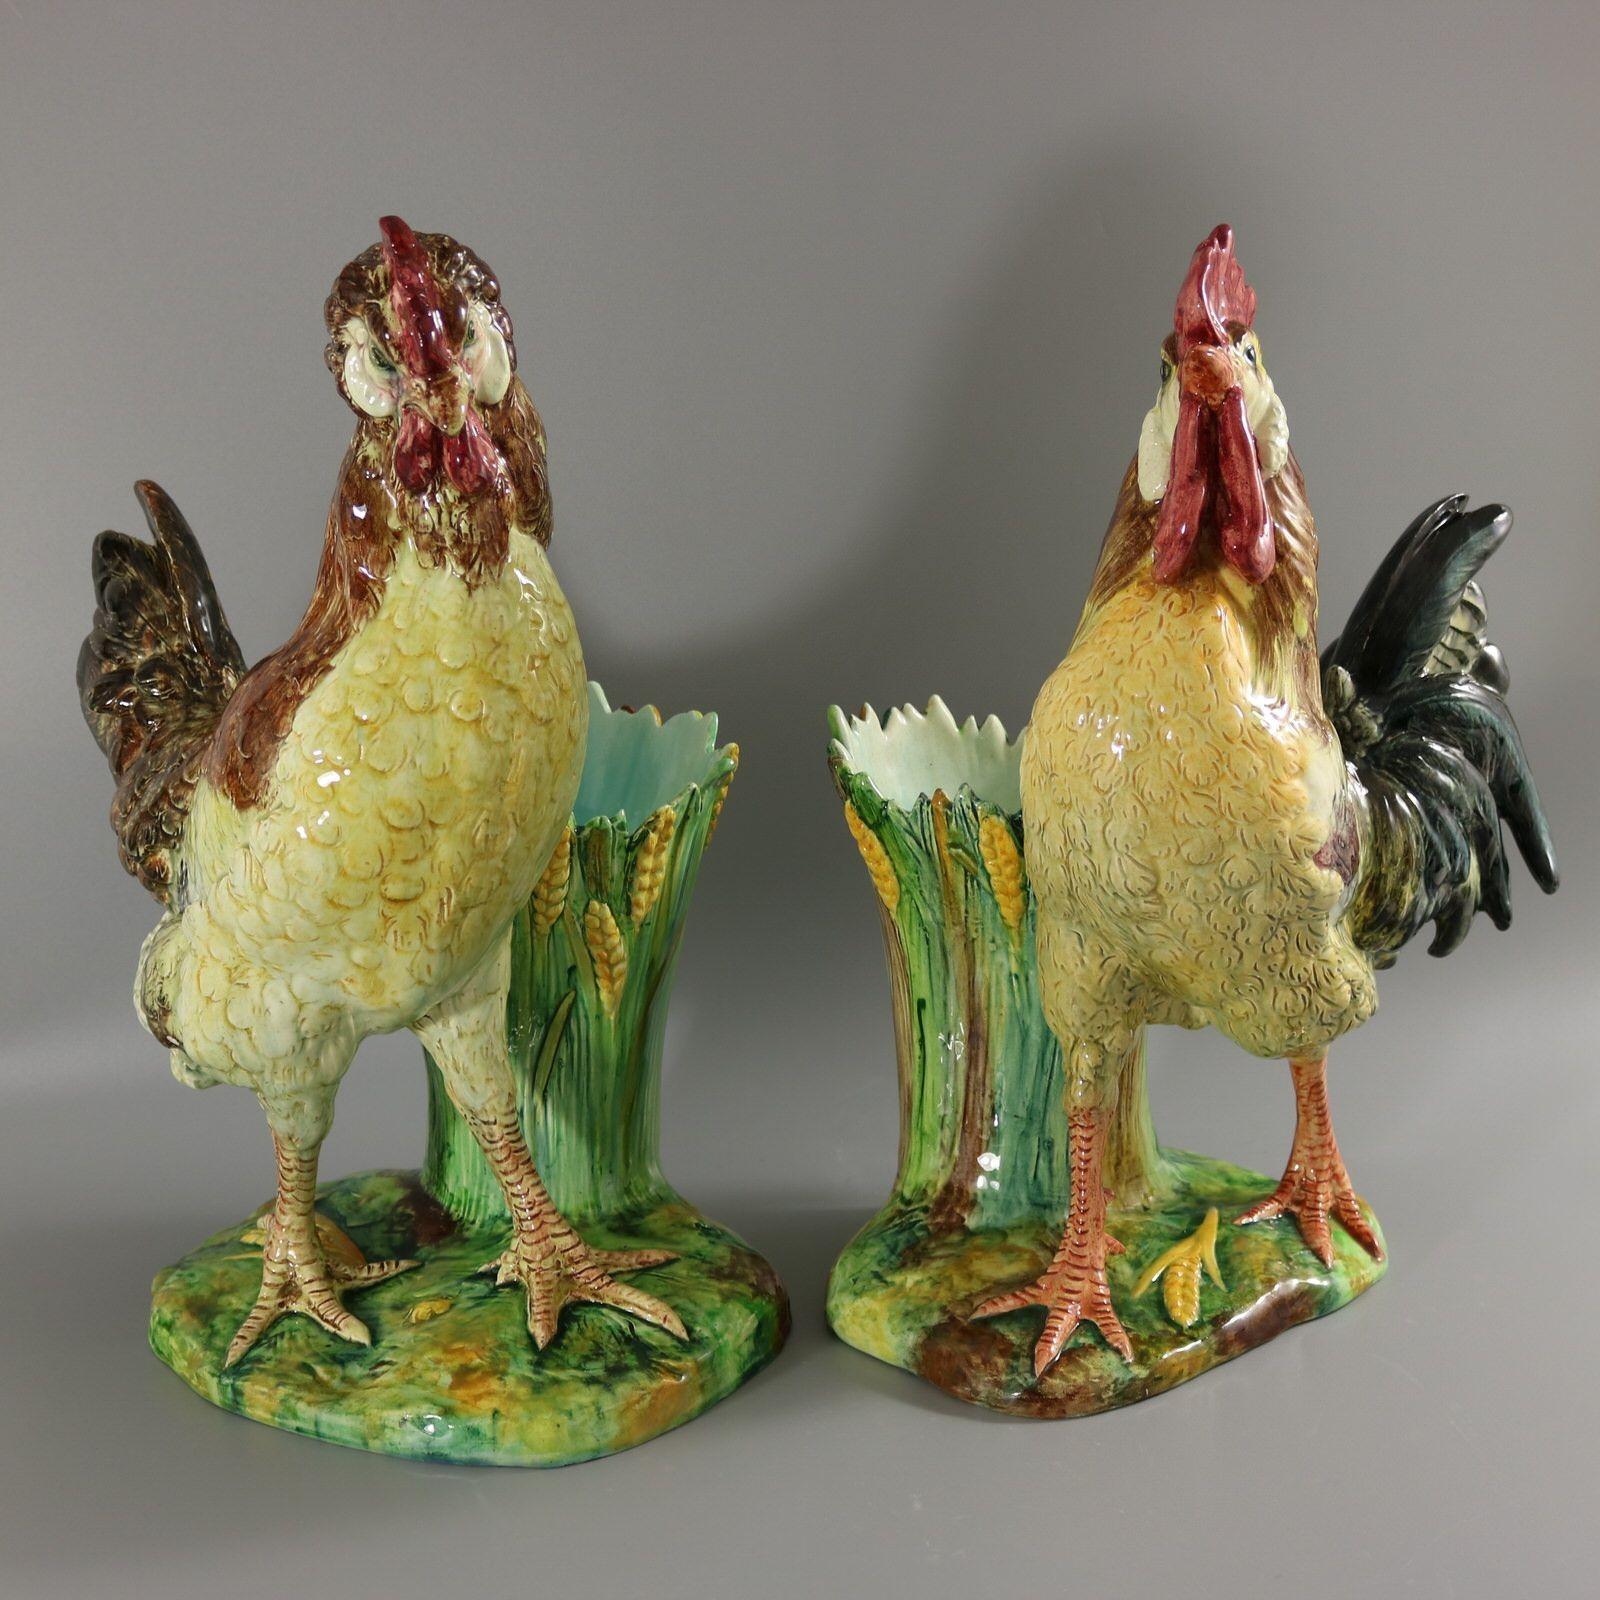 Pair of Jerome Massier Fils Majolica figural vases which feature a hen and a rooster, stood in front of a vase. The vase has leaves and wheat around the sides. Colouration: brown, yellow, green, are predominant. The rooster bears maker's marks for